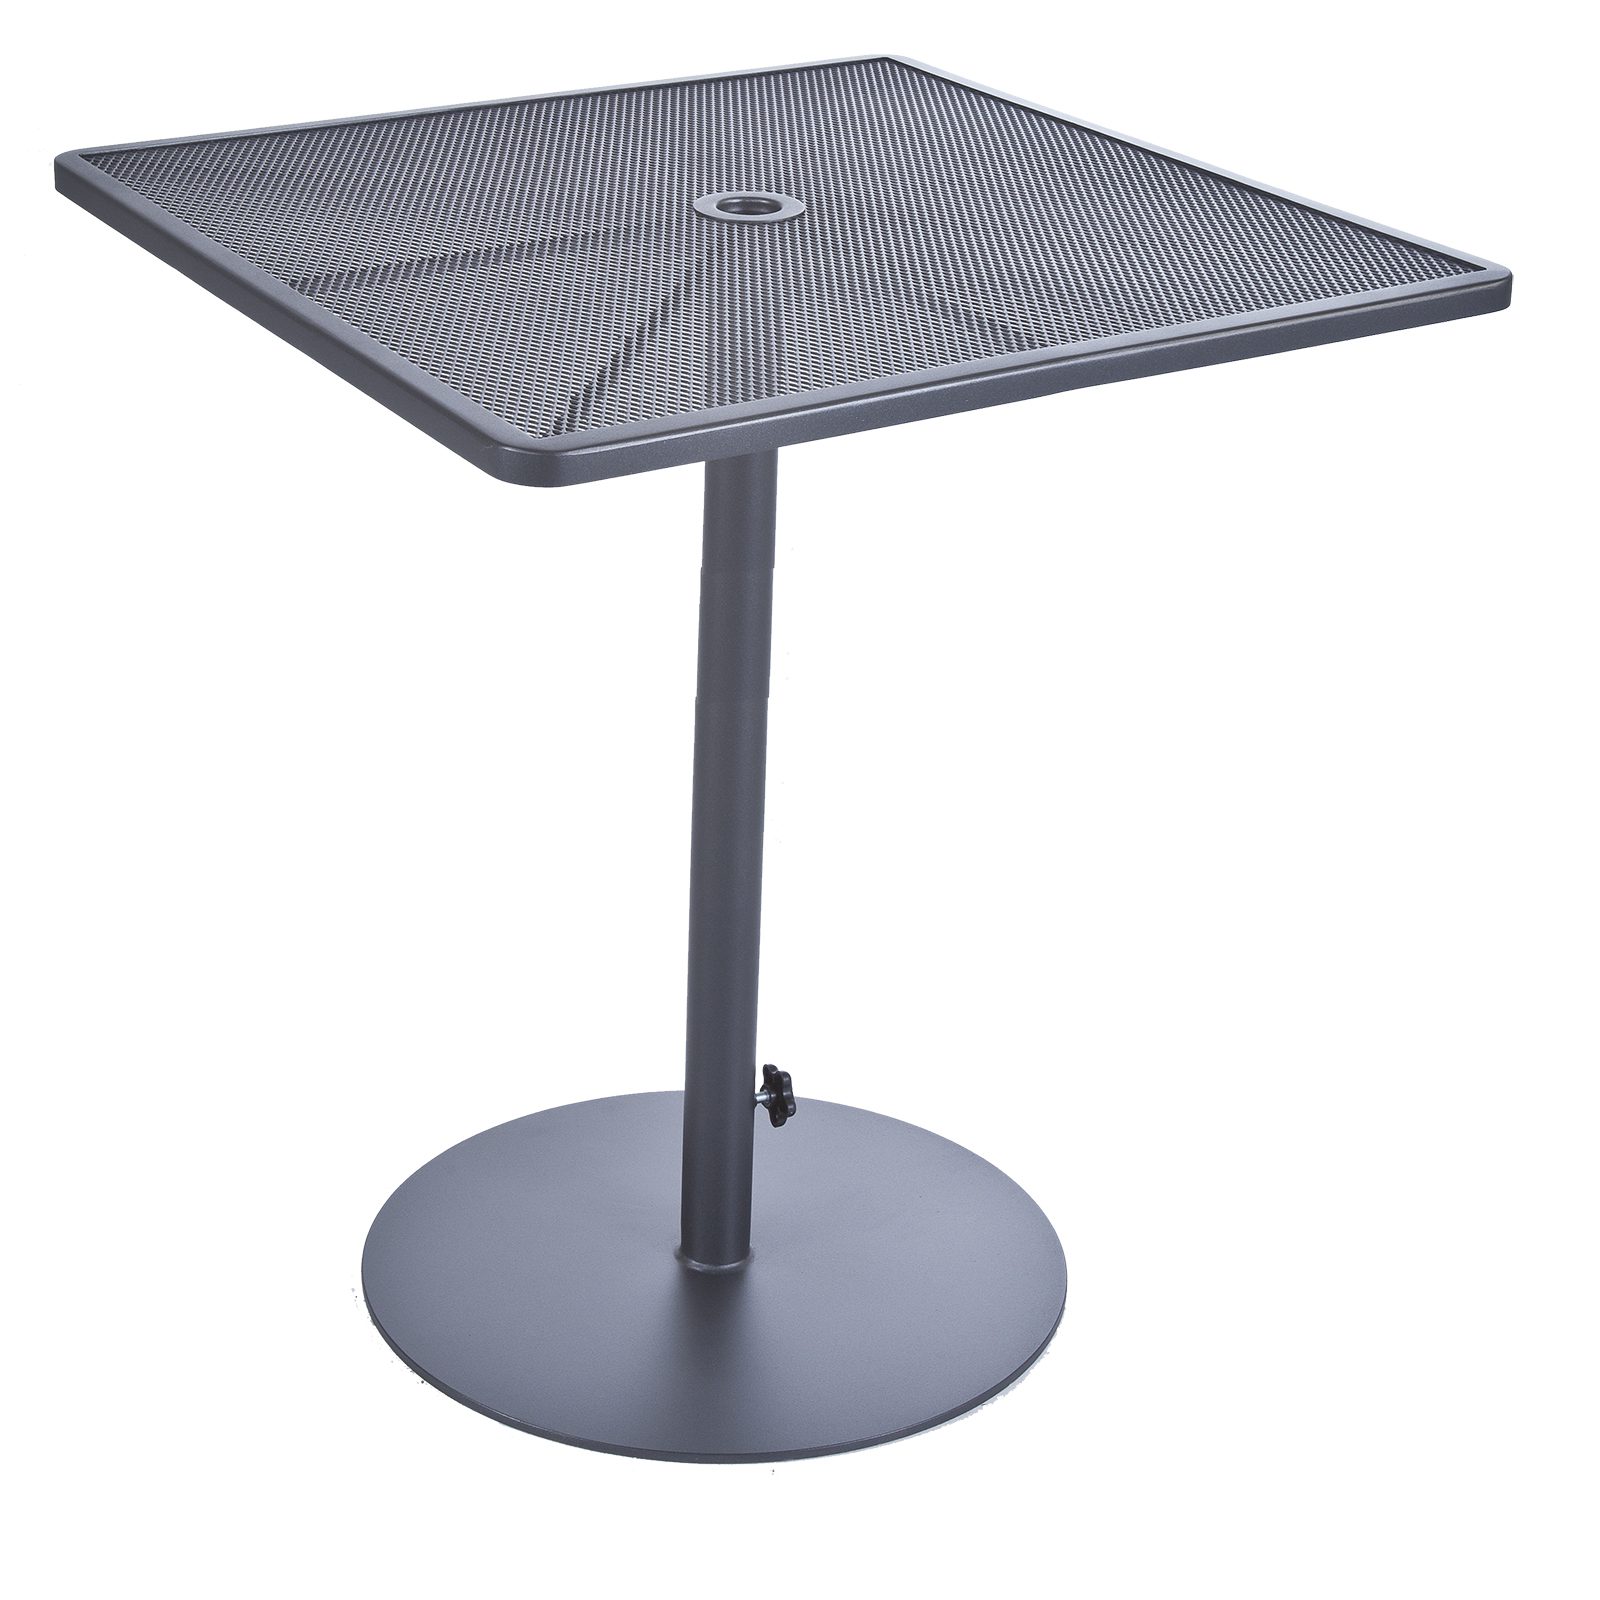 34" Sq. Pedestal Bar Table - Fully Welded Tables - Pedestal Iron Tables 120